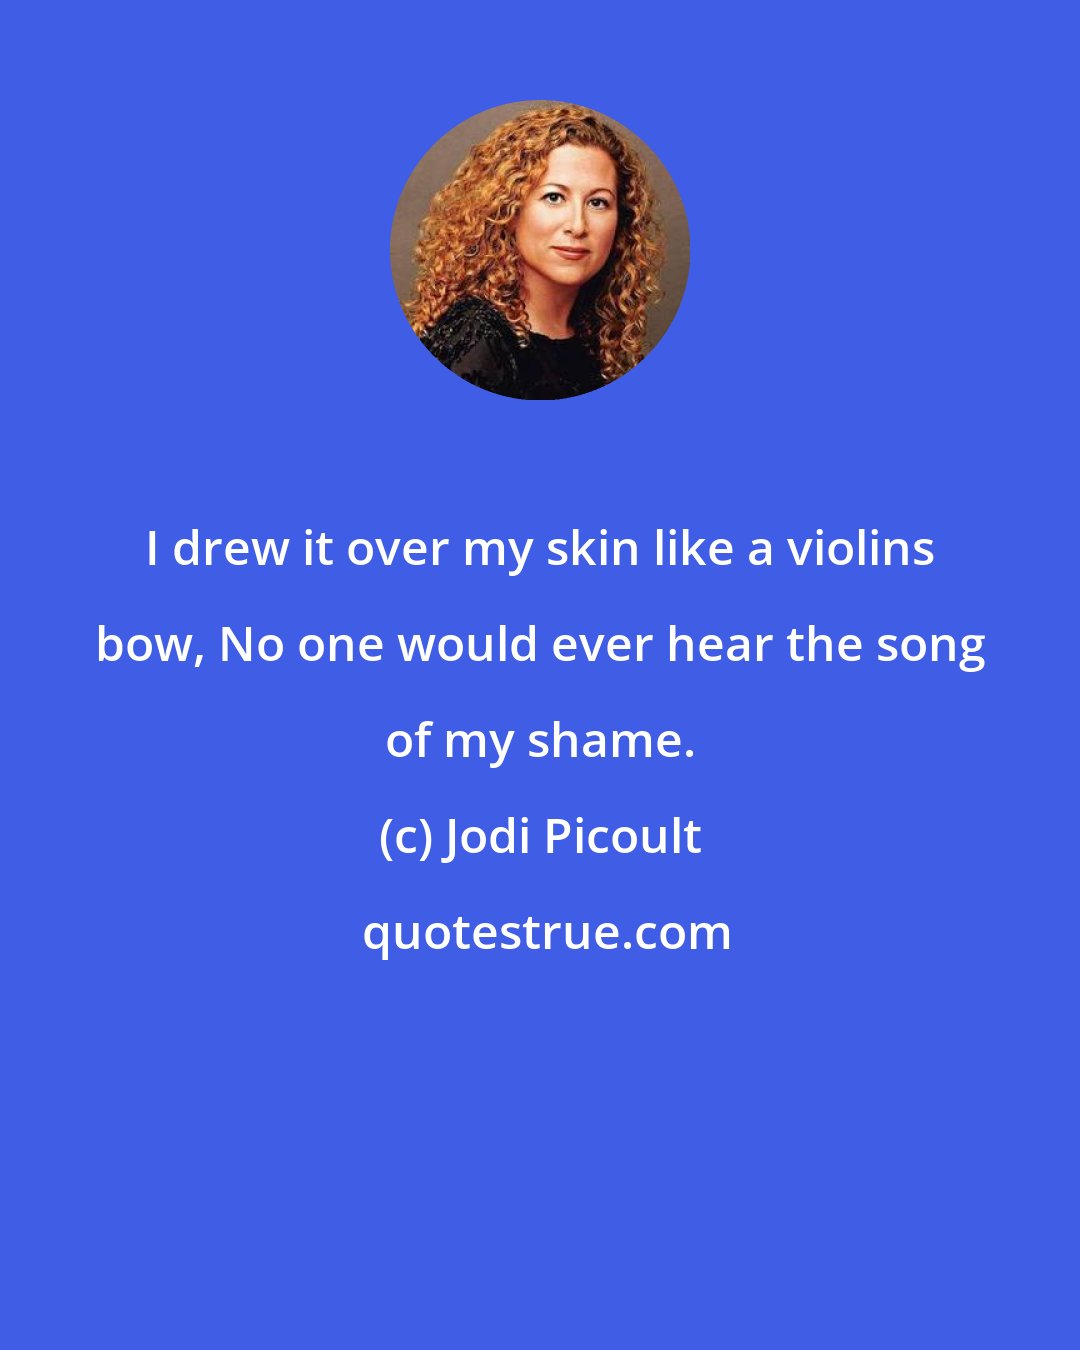 Jodi Picoult: I drew it over my skin like a violins bow, No one would ever hear the song of my shame.